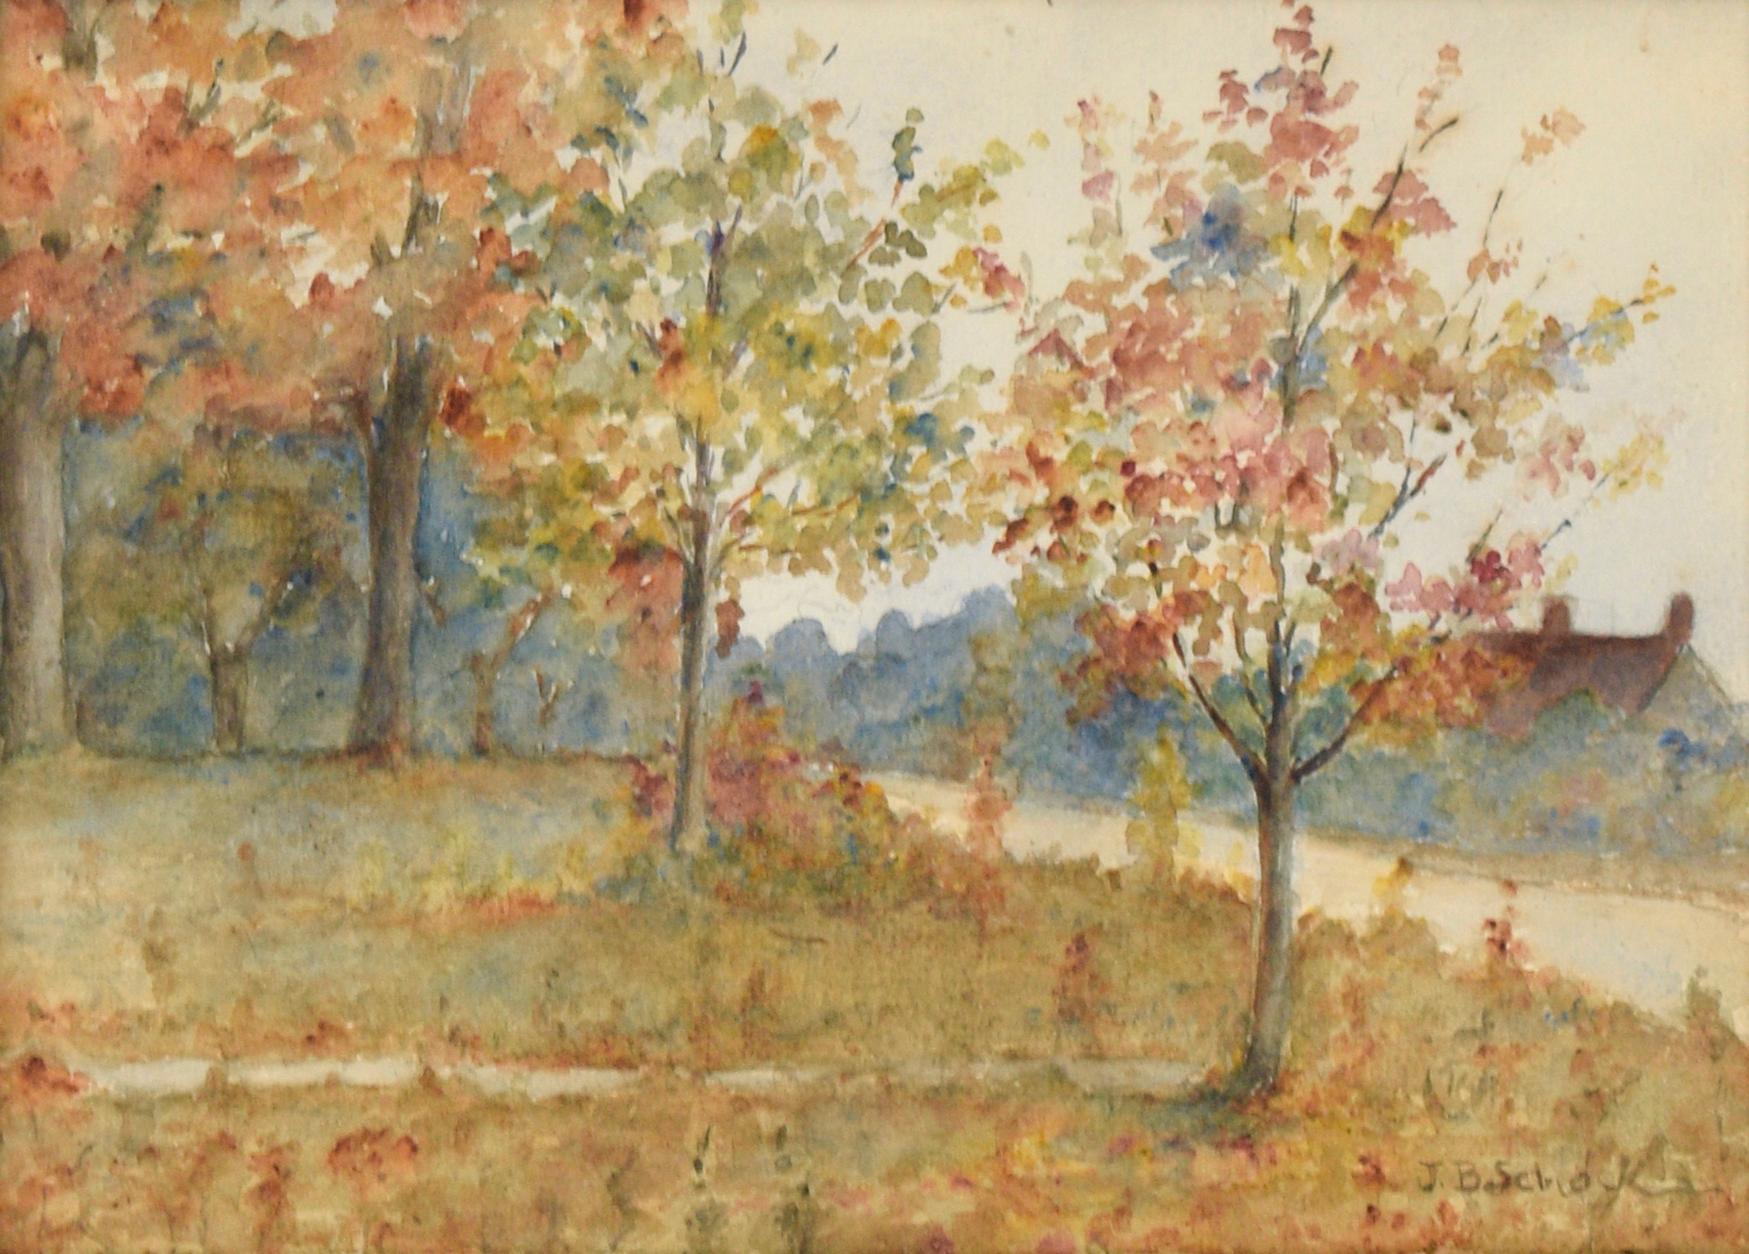 Autumn by the River - Landscape - Art by J. B. Schock